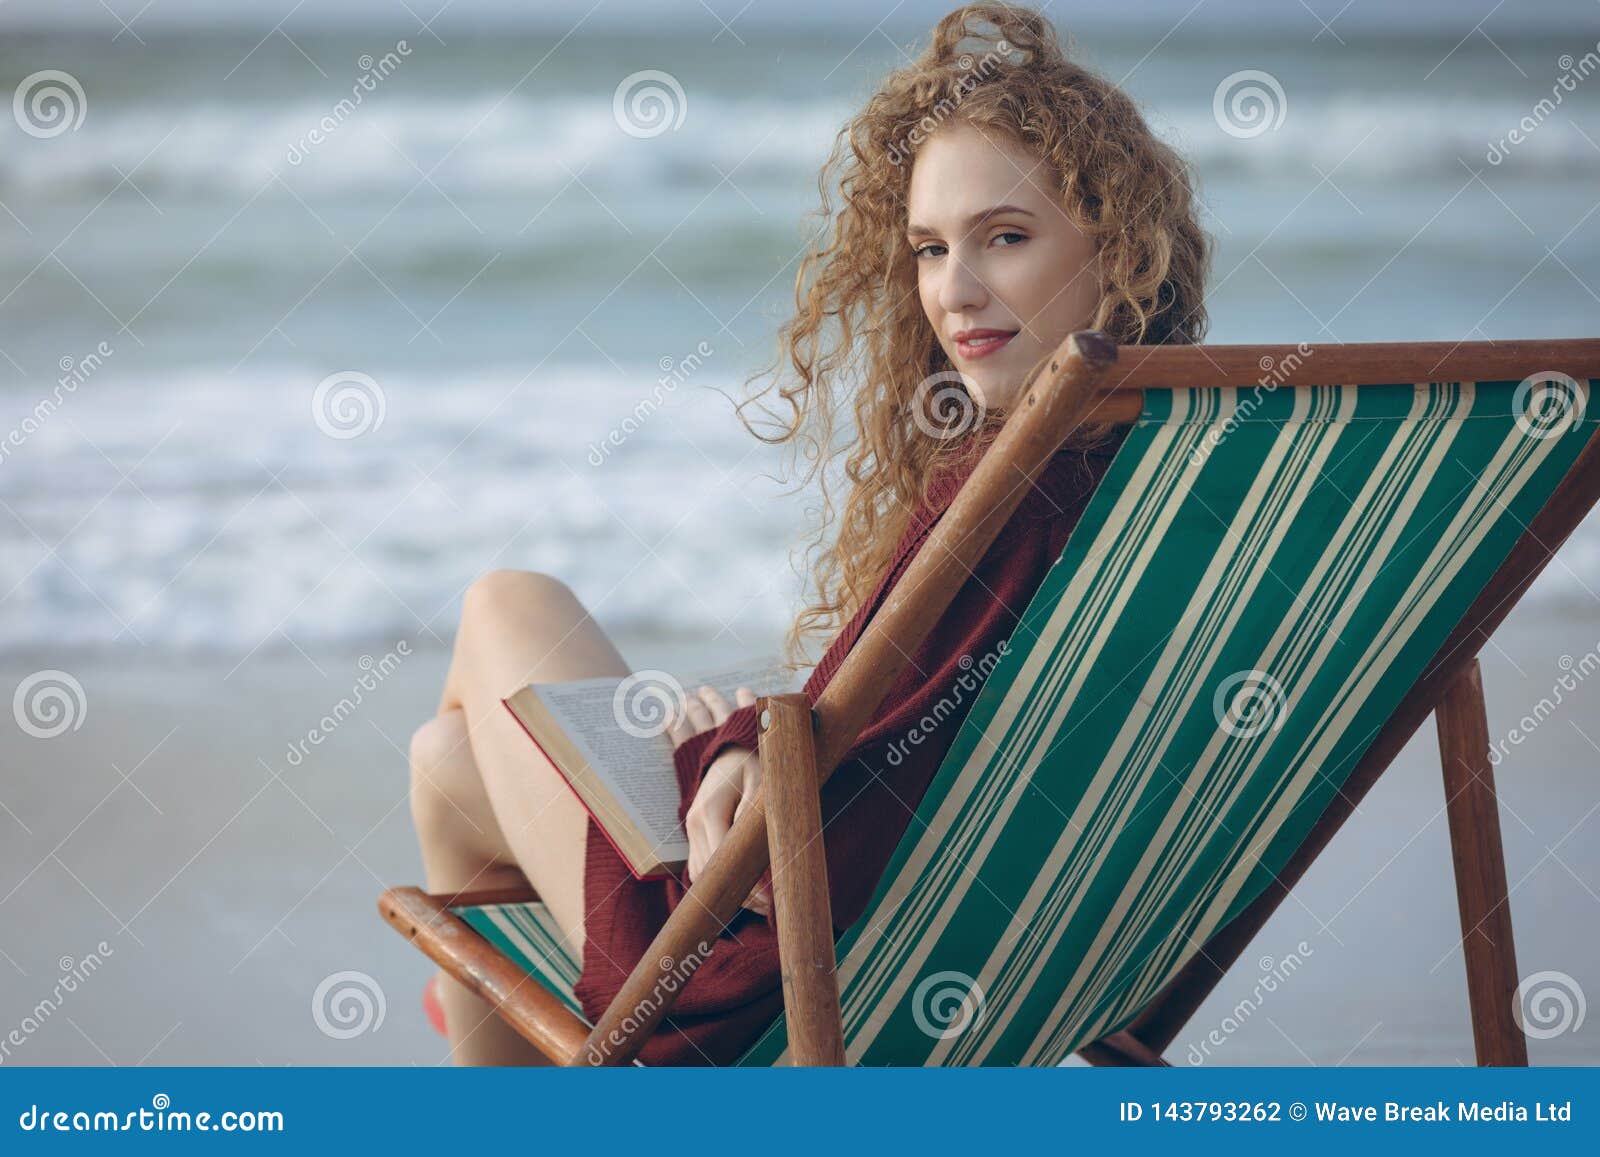 Woman Holding Book While Sitting On Sun Lounger At Beach Stock Photo